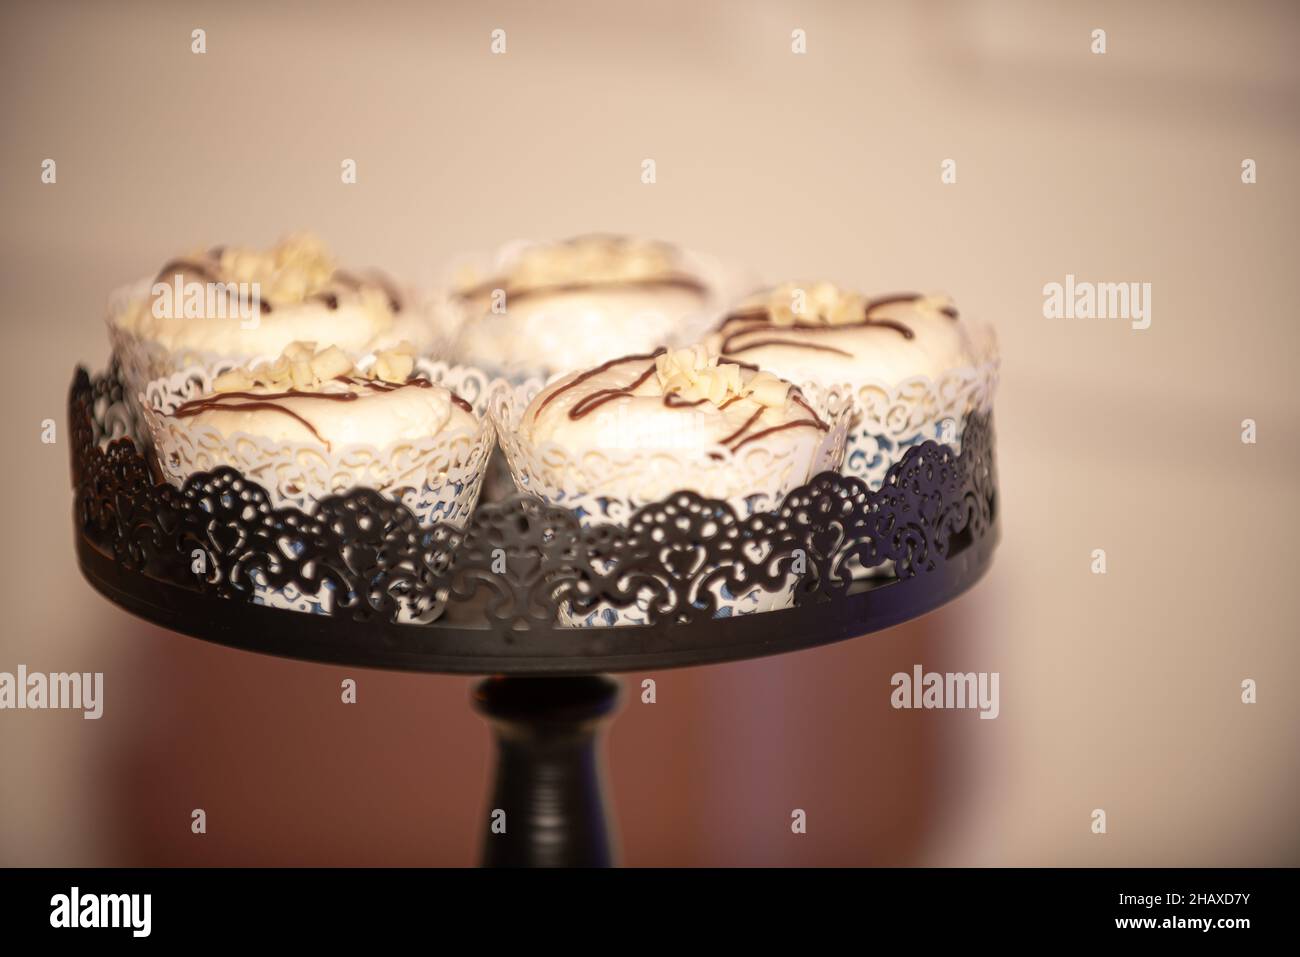 Black ast iron ornate cupcake tower with vanilla cupcakes that have chocolate fuge drizzle Stock Photo